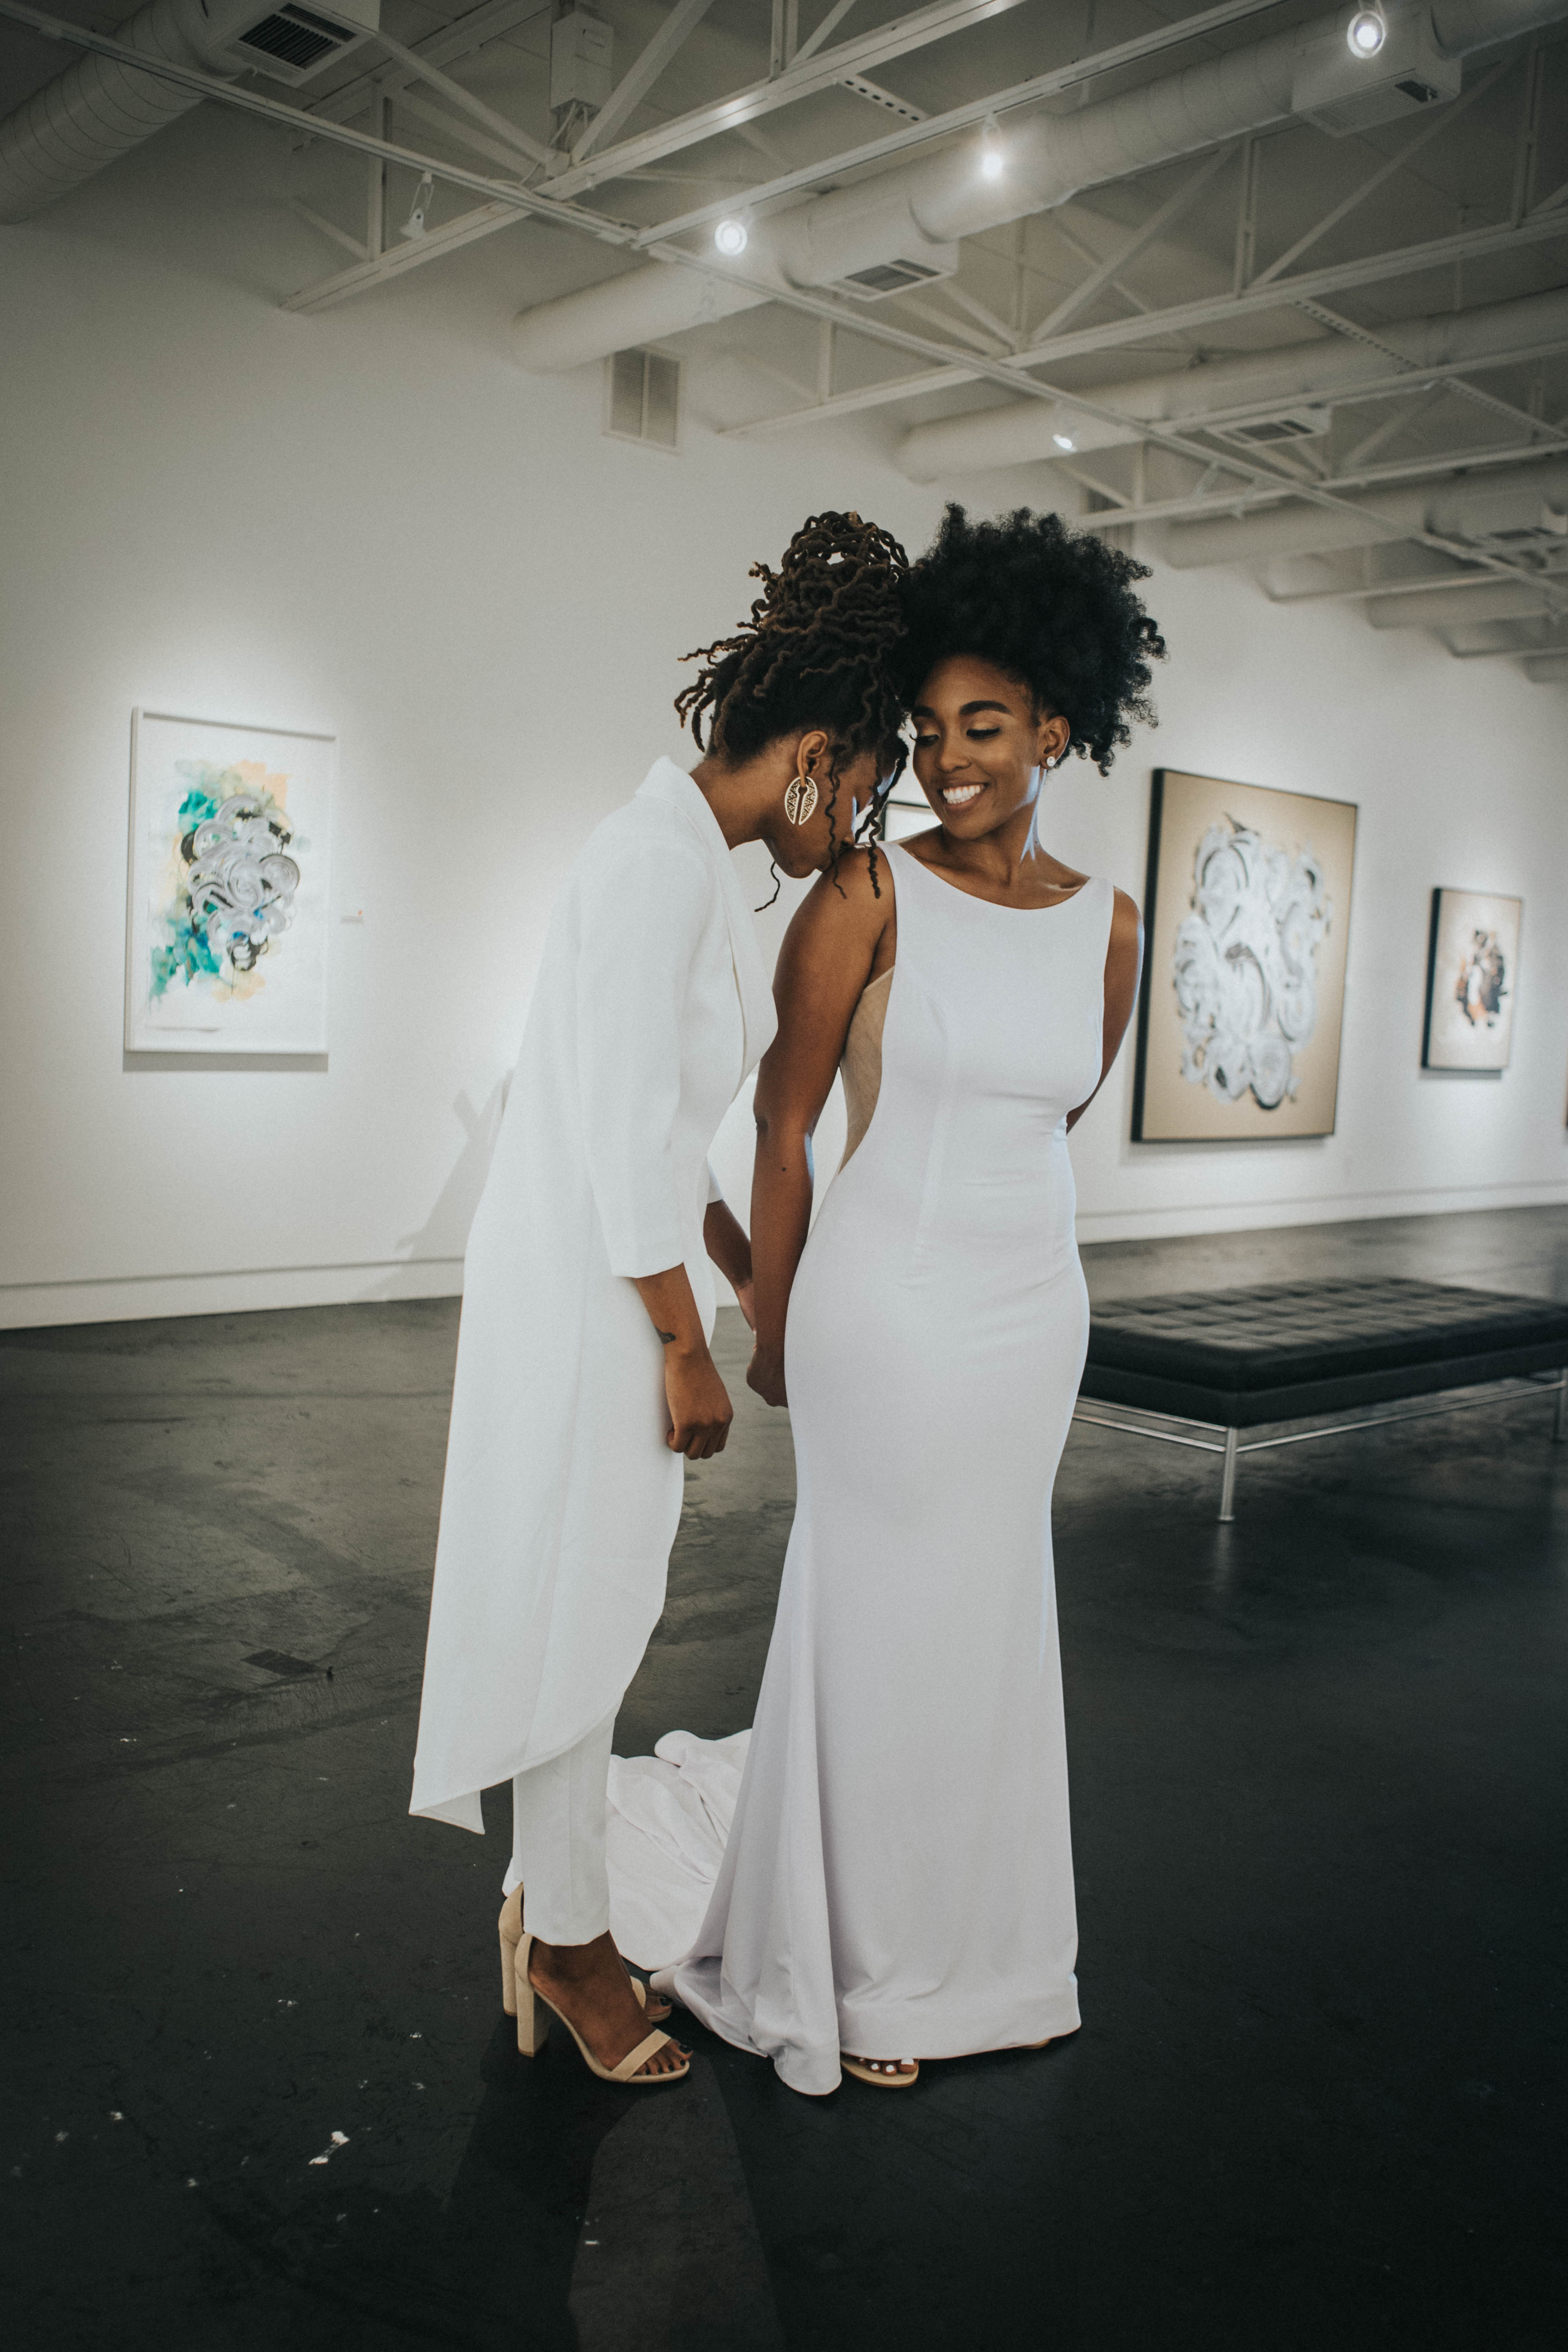 Bridal Bliss: Aww! Stephanie and Javoni’s Feel-Good Wedding Vibes Are Contagious